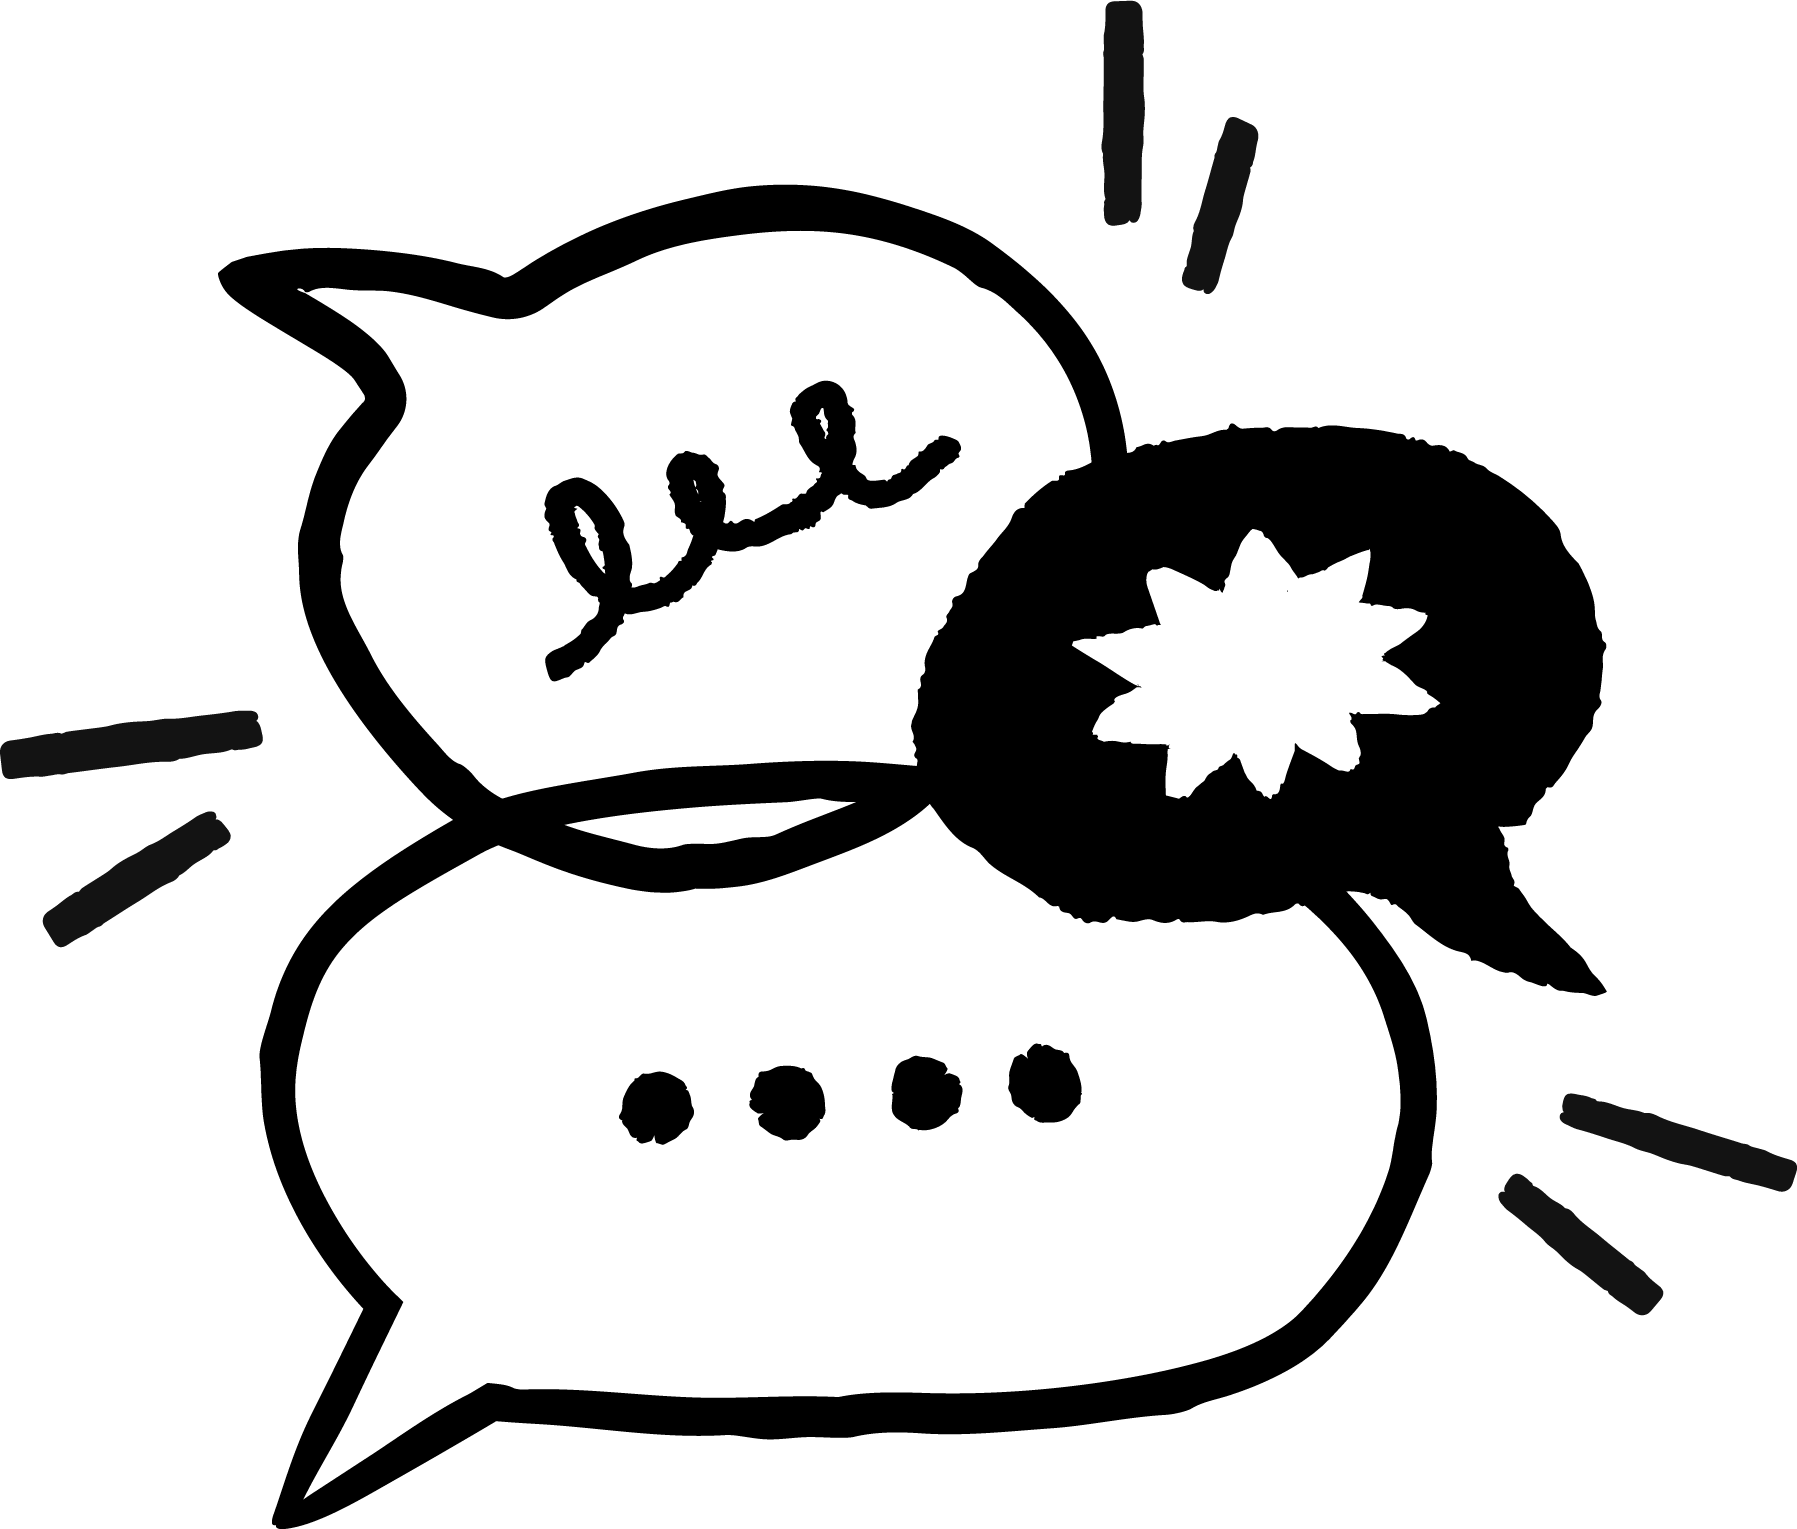 Illustration of chat bubbles